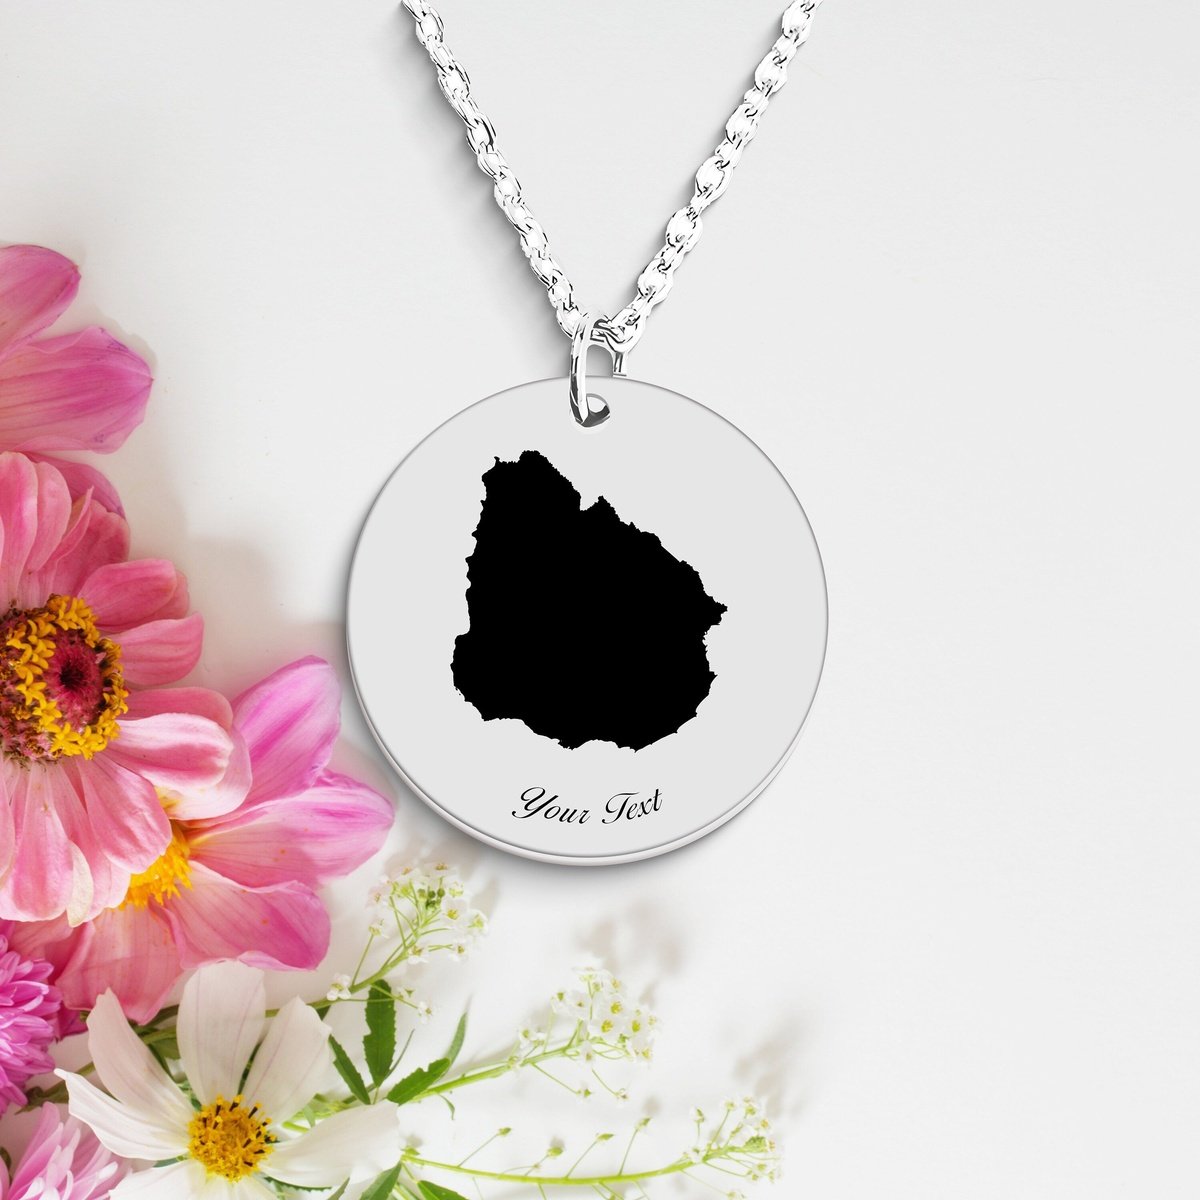 Uruguay Country Map Necklace, Your Name Necklace, Minimalist Necklace, Personalized Gift, Silver Necklace, Gift For Him Her